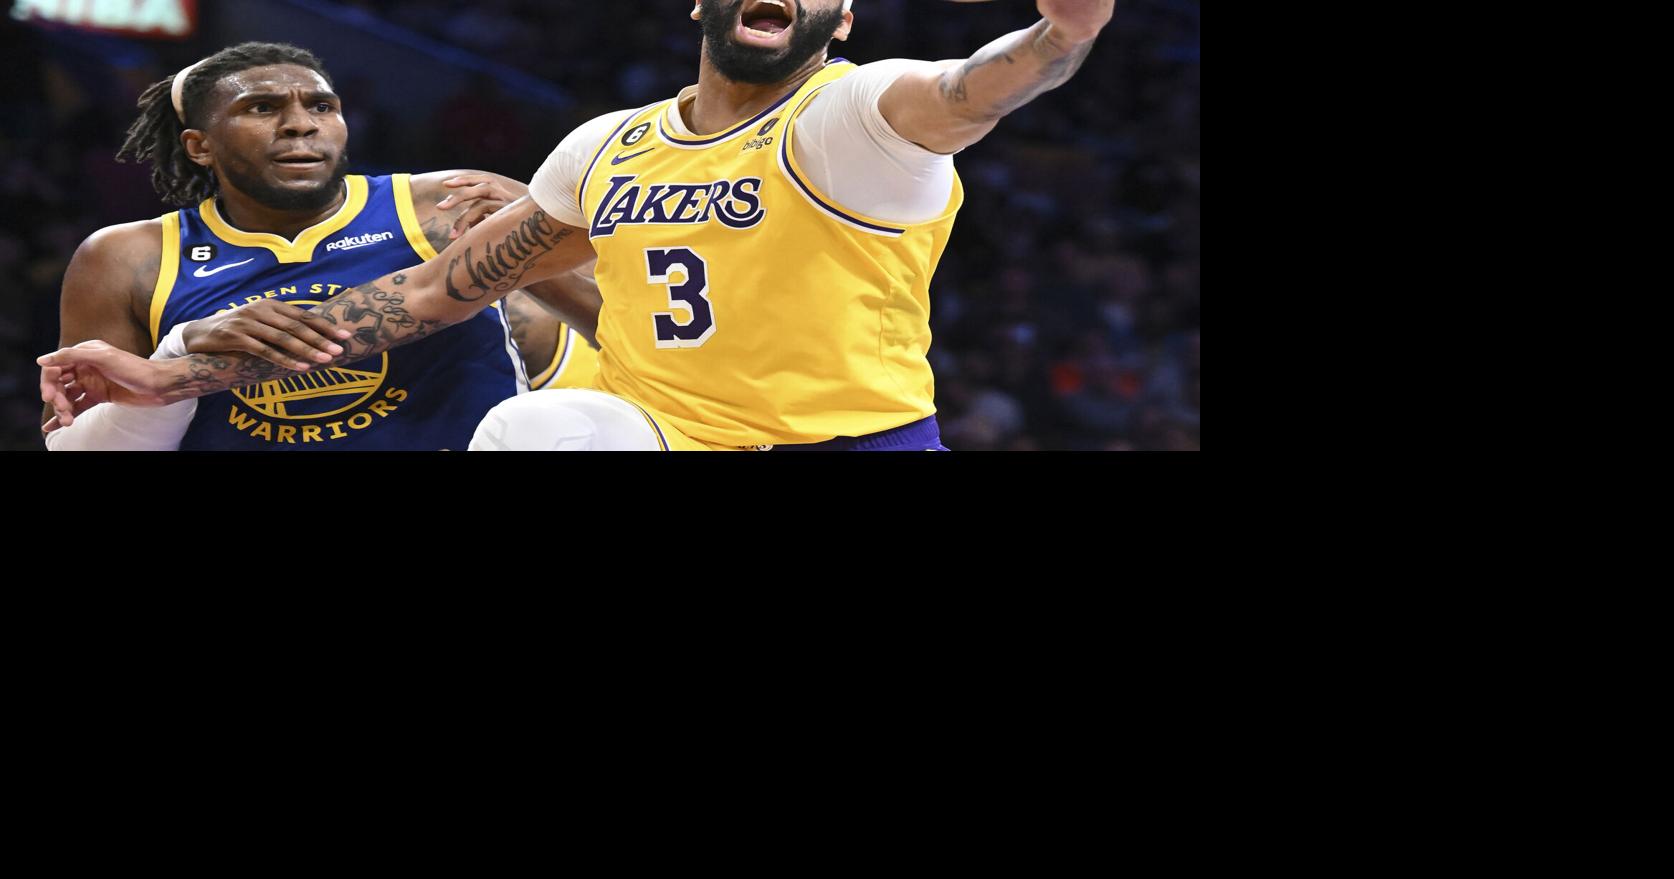 Kiszla: Yes, the Nuggets got punked by the Lakers and NBA refs. But whining  won't win the Western Conference finals. – The Denver Post